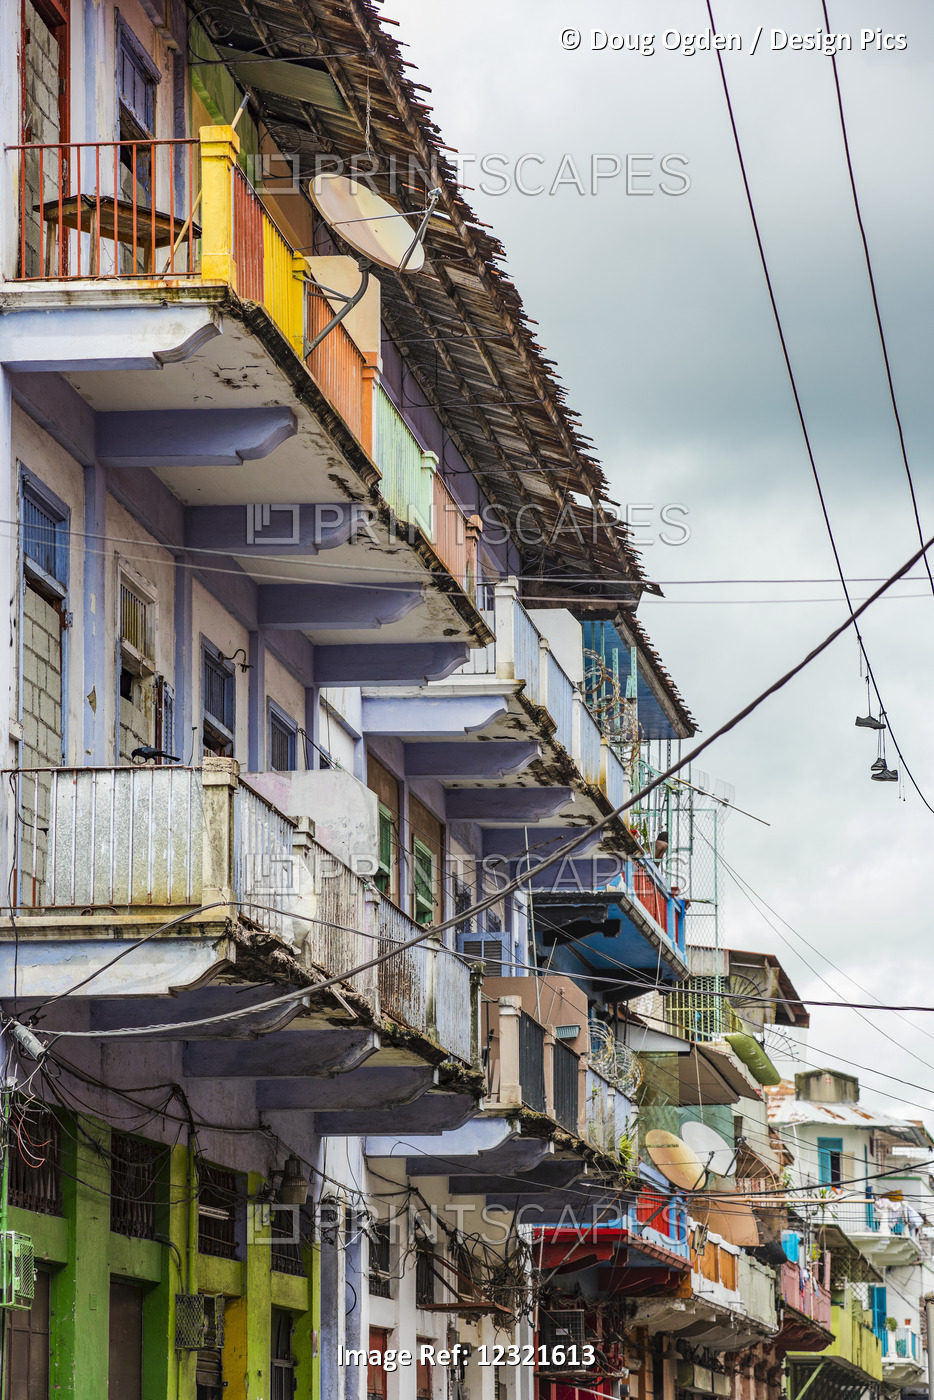 A Street View In The Casco Viejo Area Of Panama City With Wires, Satellite ...